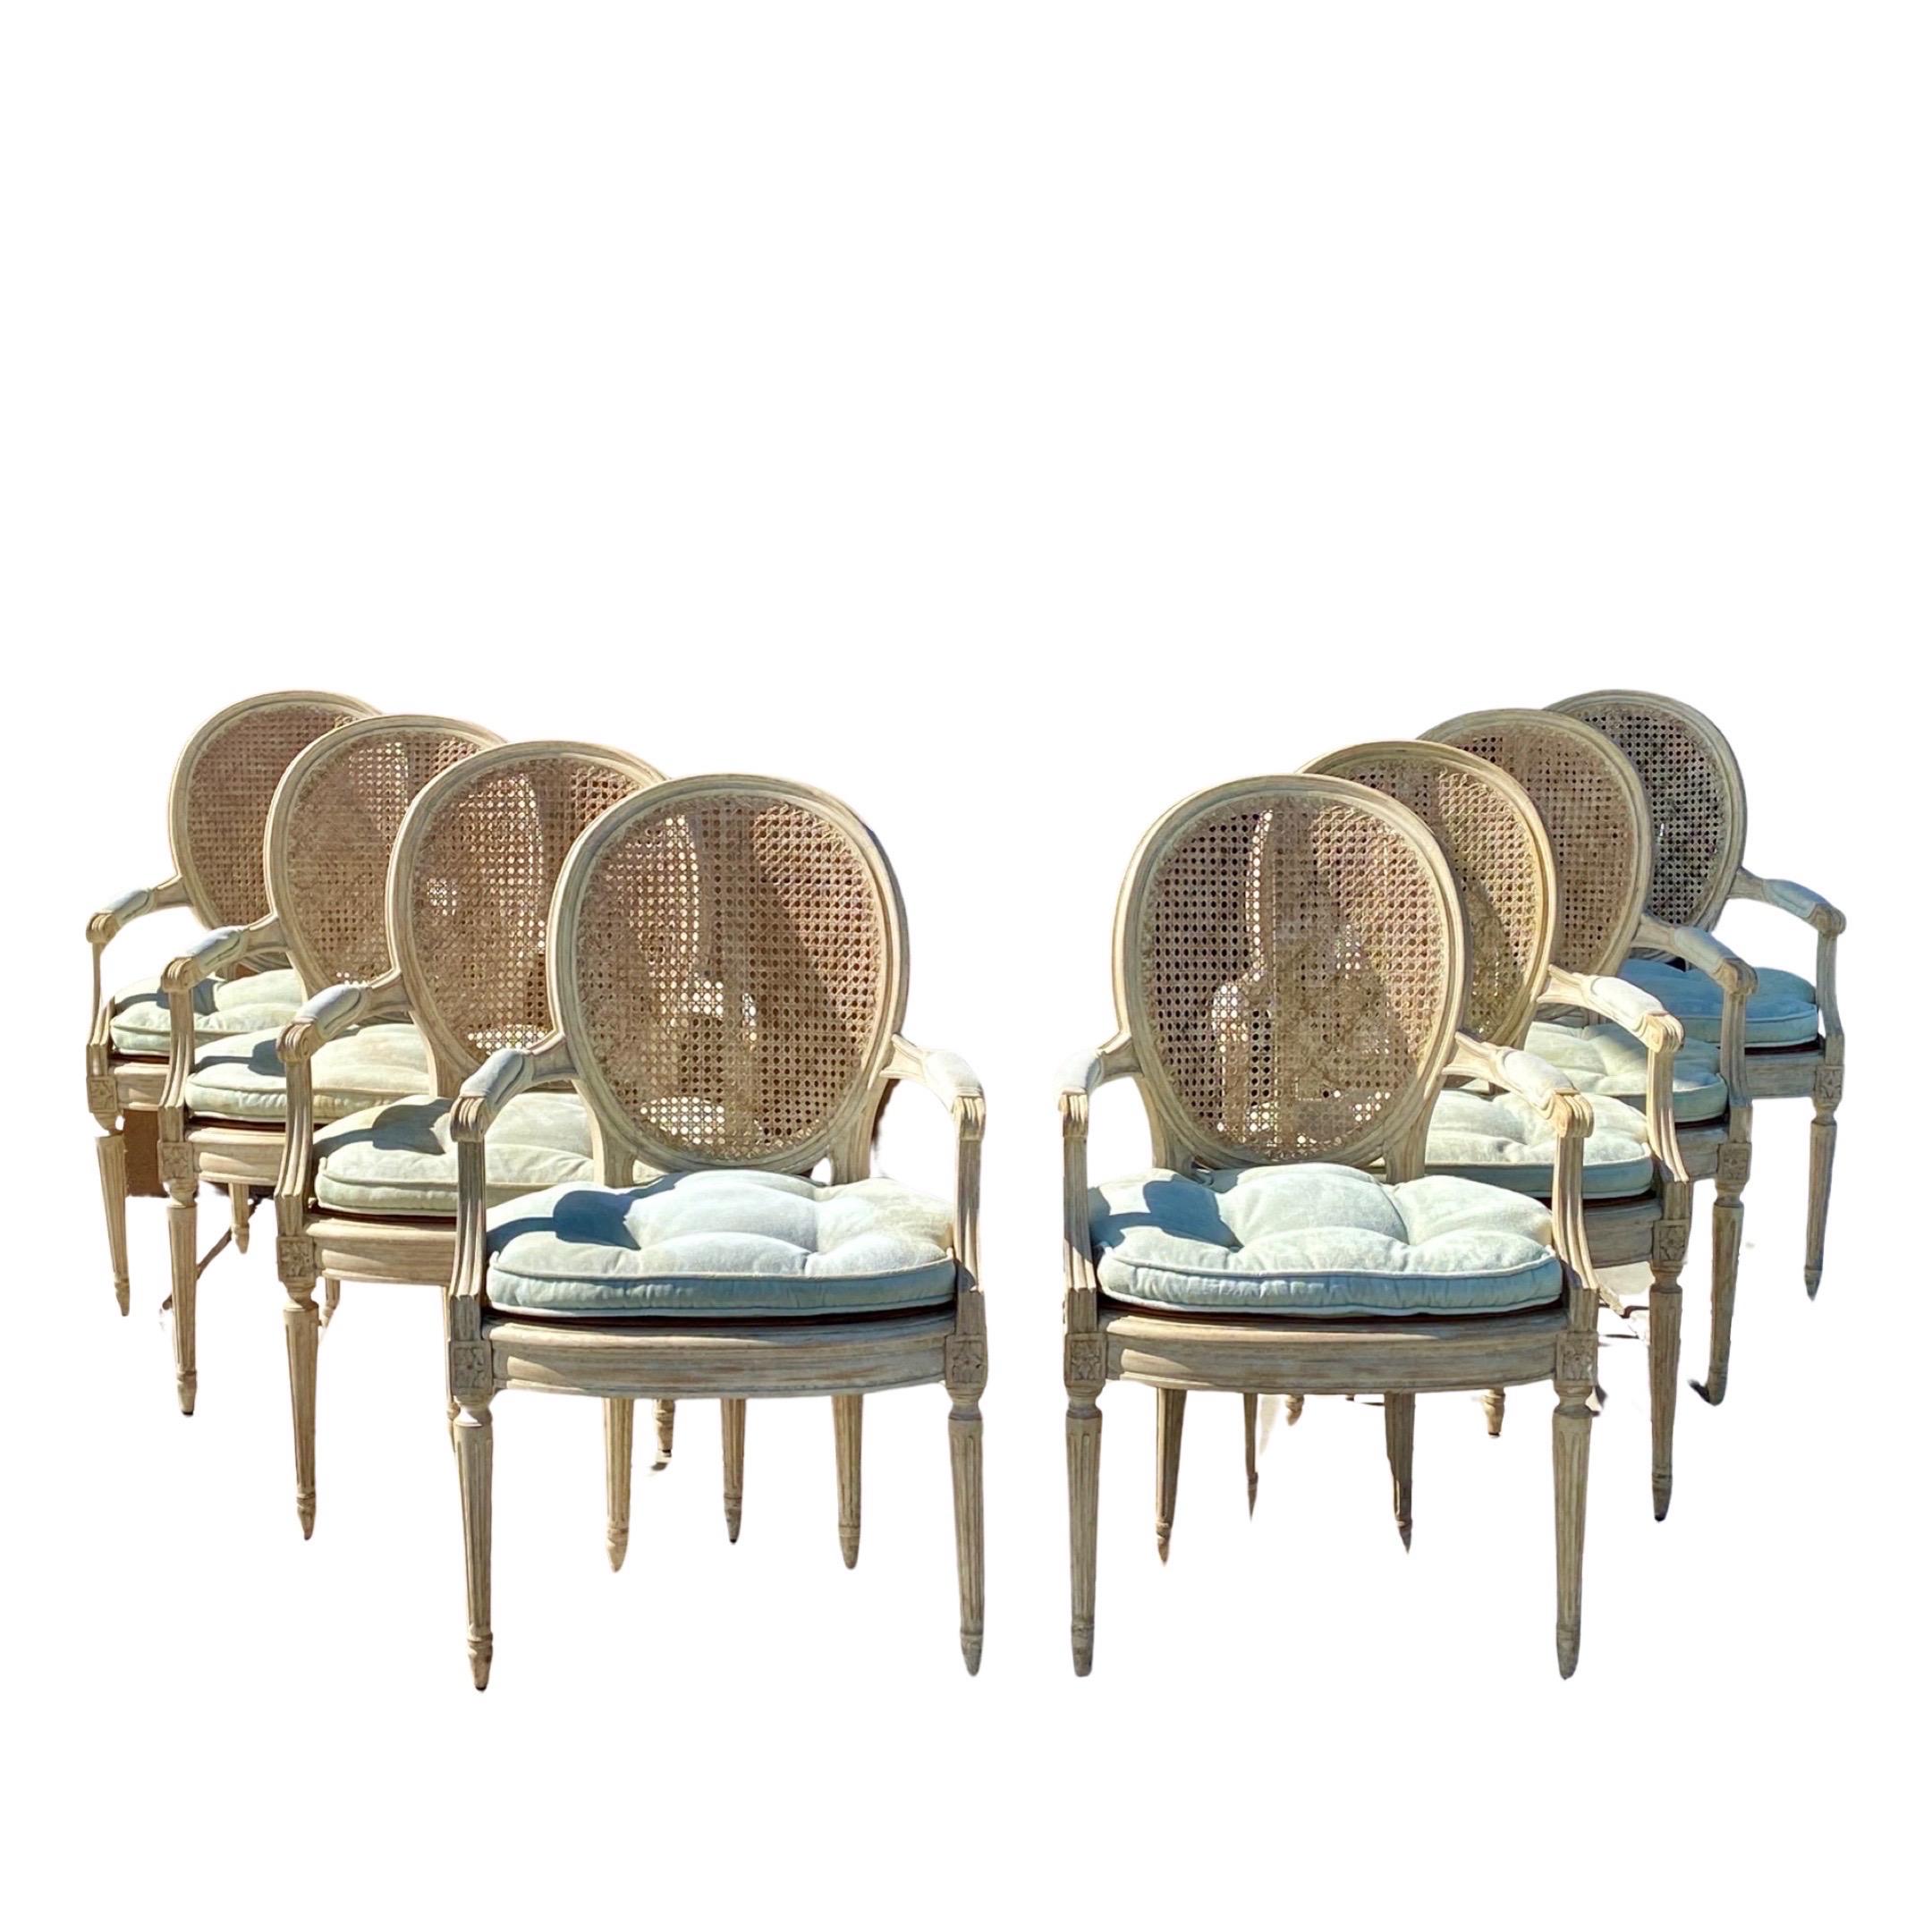 Set of 8 Dining Room Chairs (all with arms!) in the Style of Maison Jansen from a Palm Springs estate that was so spectacular! It was designed by the legendary interior designer Arthur Elrod for the Goldberg family of Chicago as their winter getaway